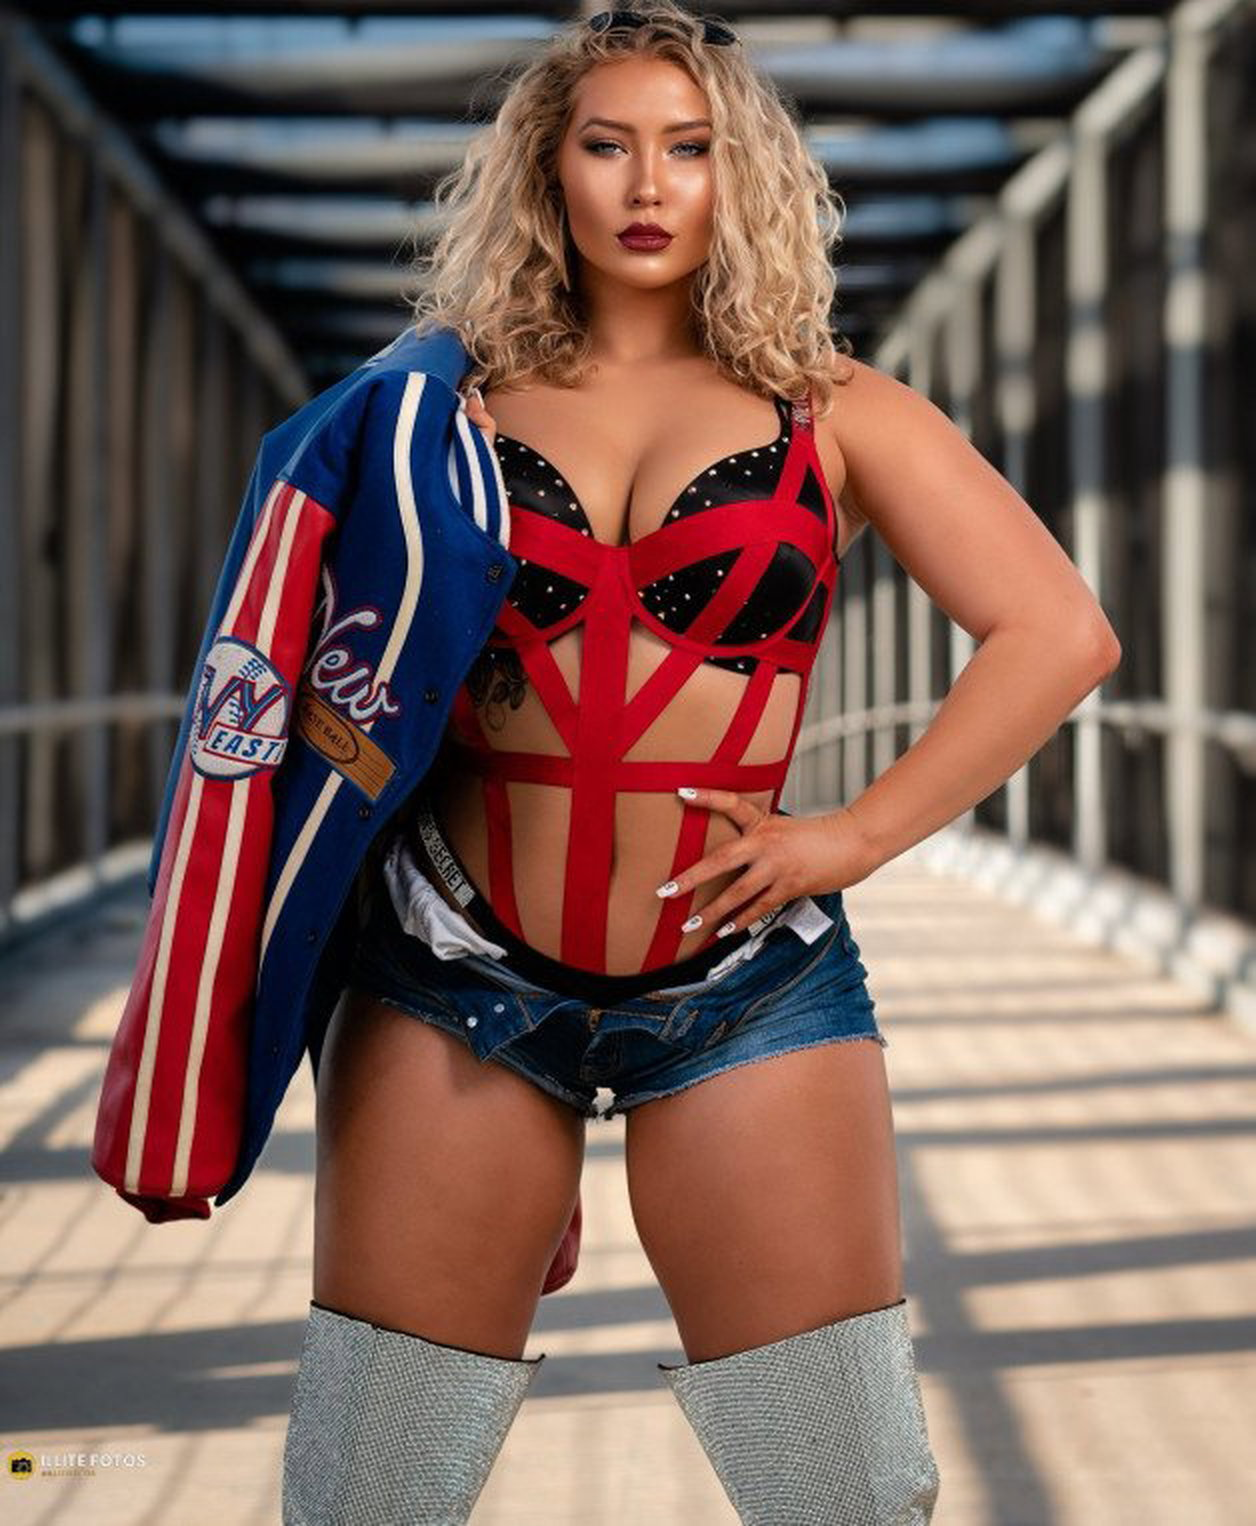 Watch the Photo by Ruinedcarpet with the username @Ruinedcarpet, posted on September 14, 2022. The post is about the topic Women of wrestling. and the text says 'Nikkita Lyons.

#NikkitaLyons #Hot #Thick #Cute #Blonde #ProWrestler #Goddess #Amazon #Model #TotalBabe #CurlyHair #Beauty #Thighs #Underwear #Possing #Outdoors #Shorts #Jeans #Makeup #Pretty #WifeMaterial #Hottie #Thickness #Cutie #Modeling #Photoshoot..'